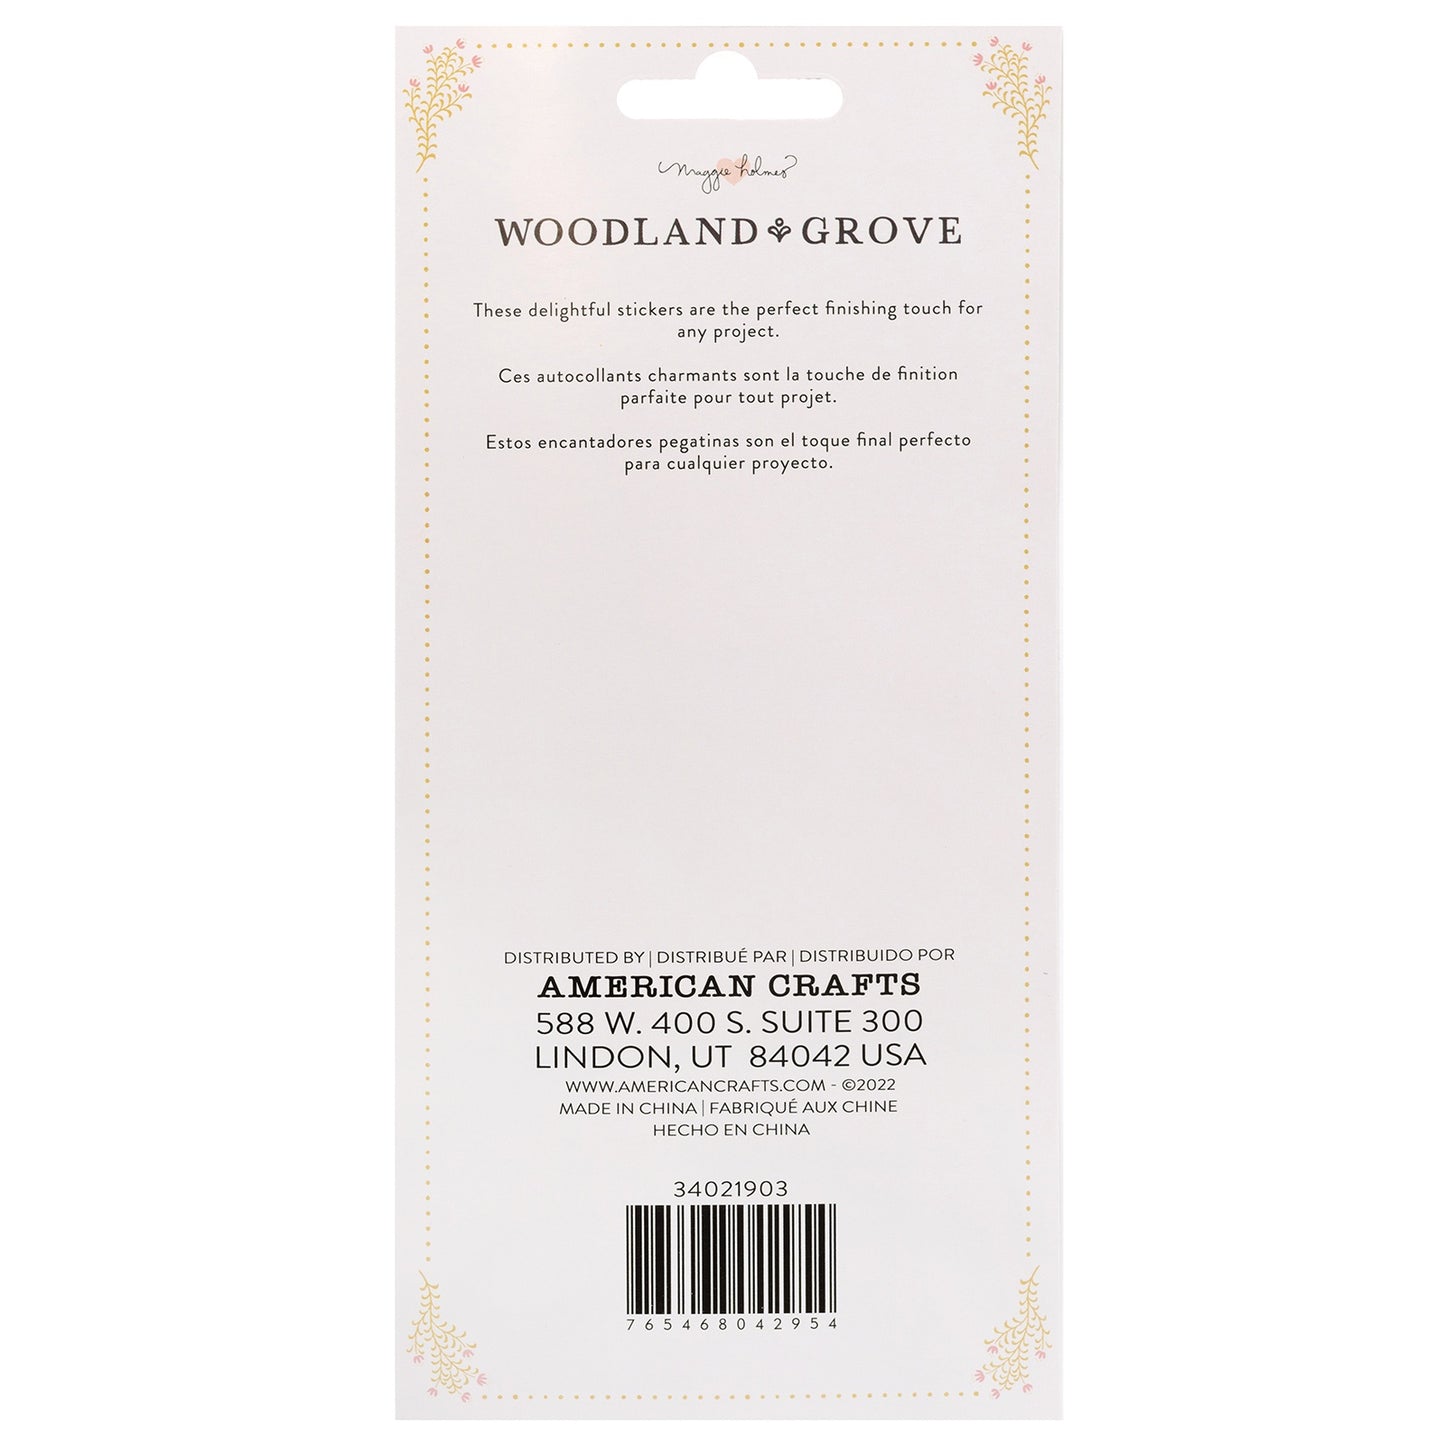 Maggie Holmes Woodland Grove Layered Stickers 6/Pkg-Gold Foil Accents